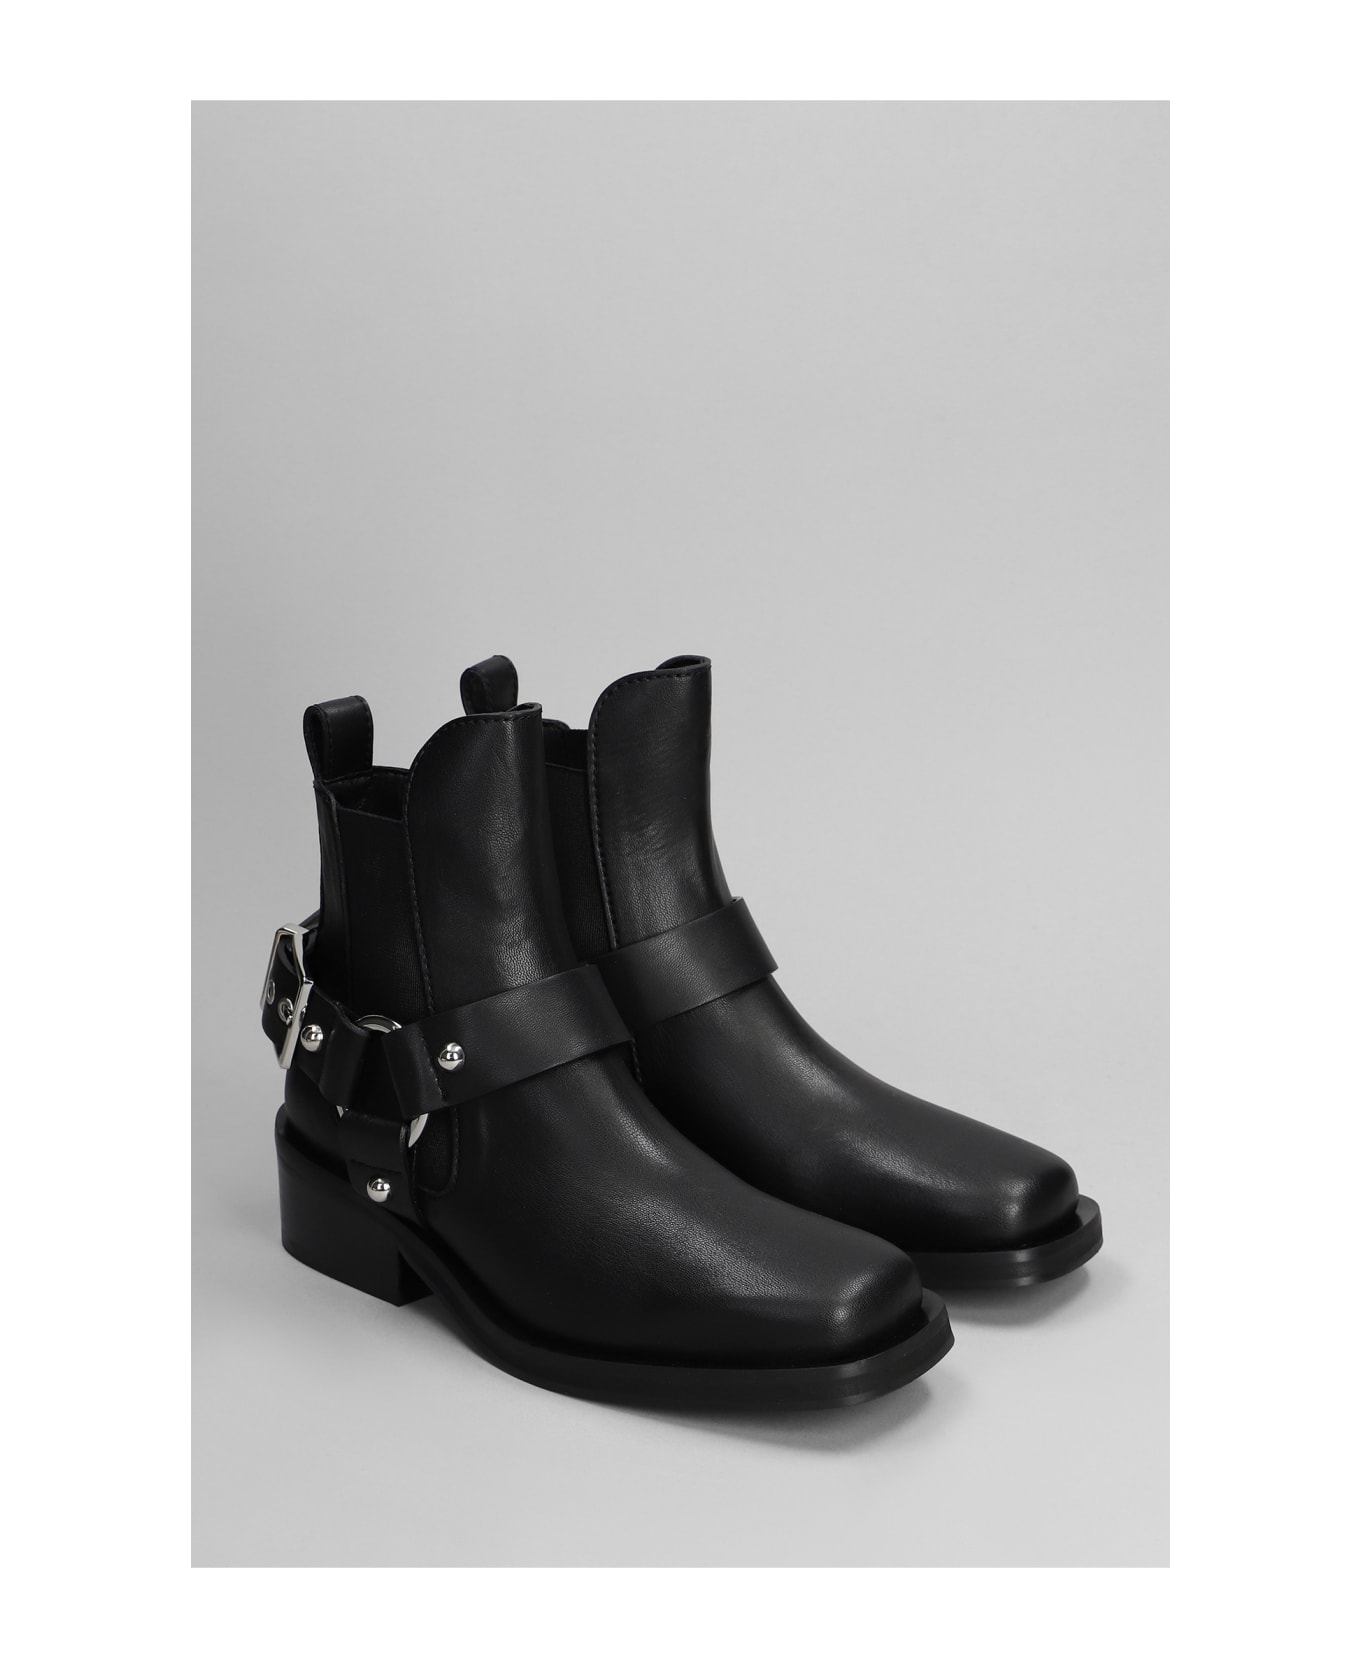 Ganni High Heels Ankle Boots In Black Leather - Black